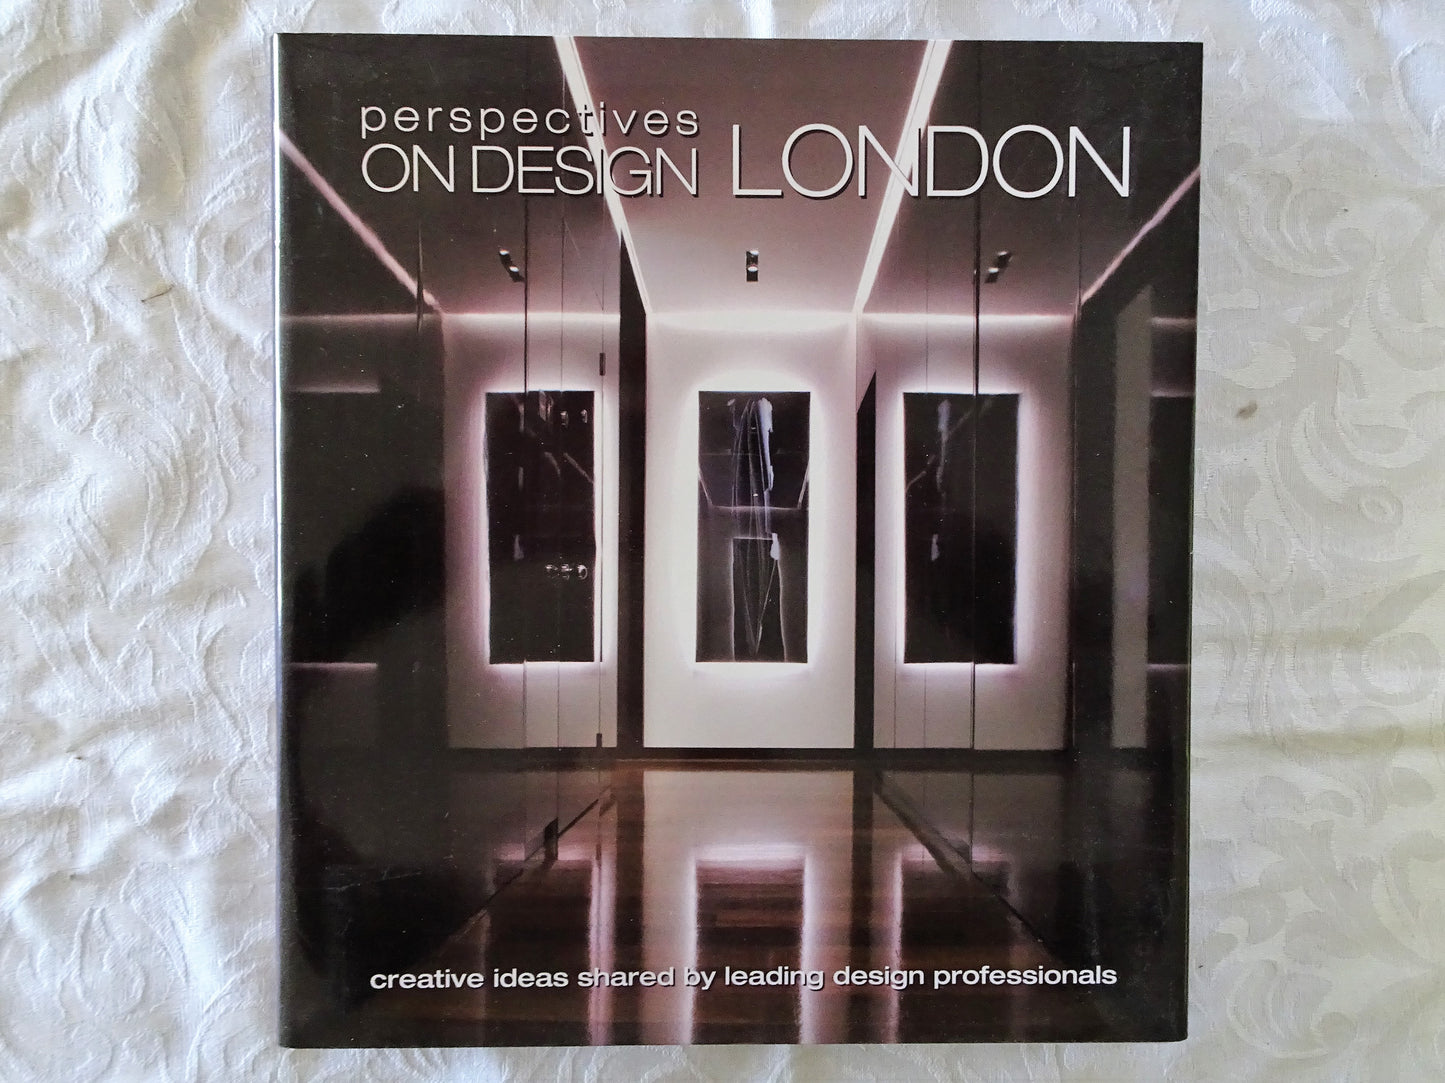 Perspectives on Design London by Panache Partners